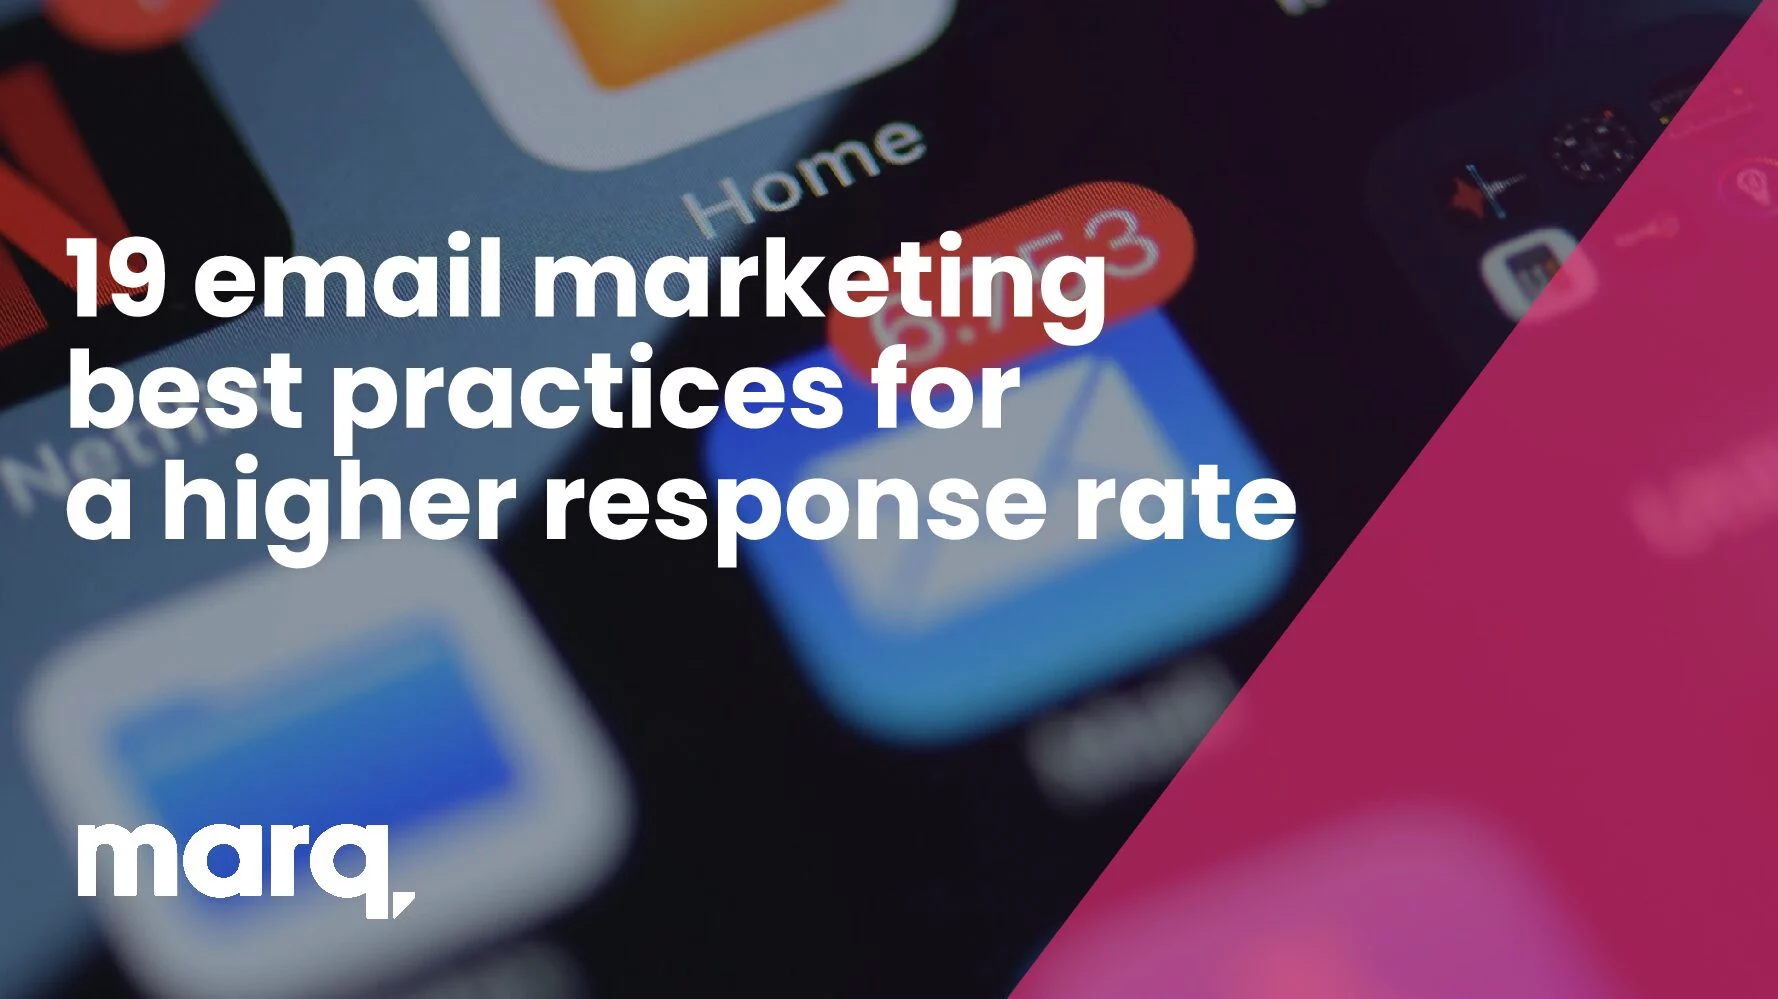 19 email marketing best practices for a higher response rate